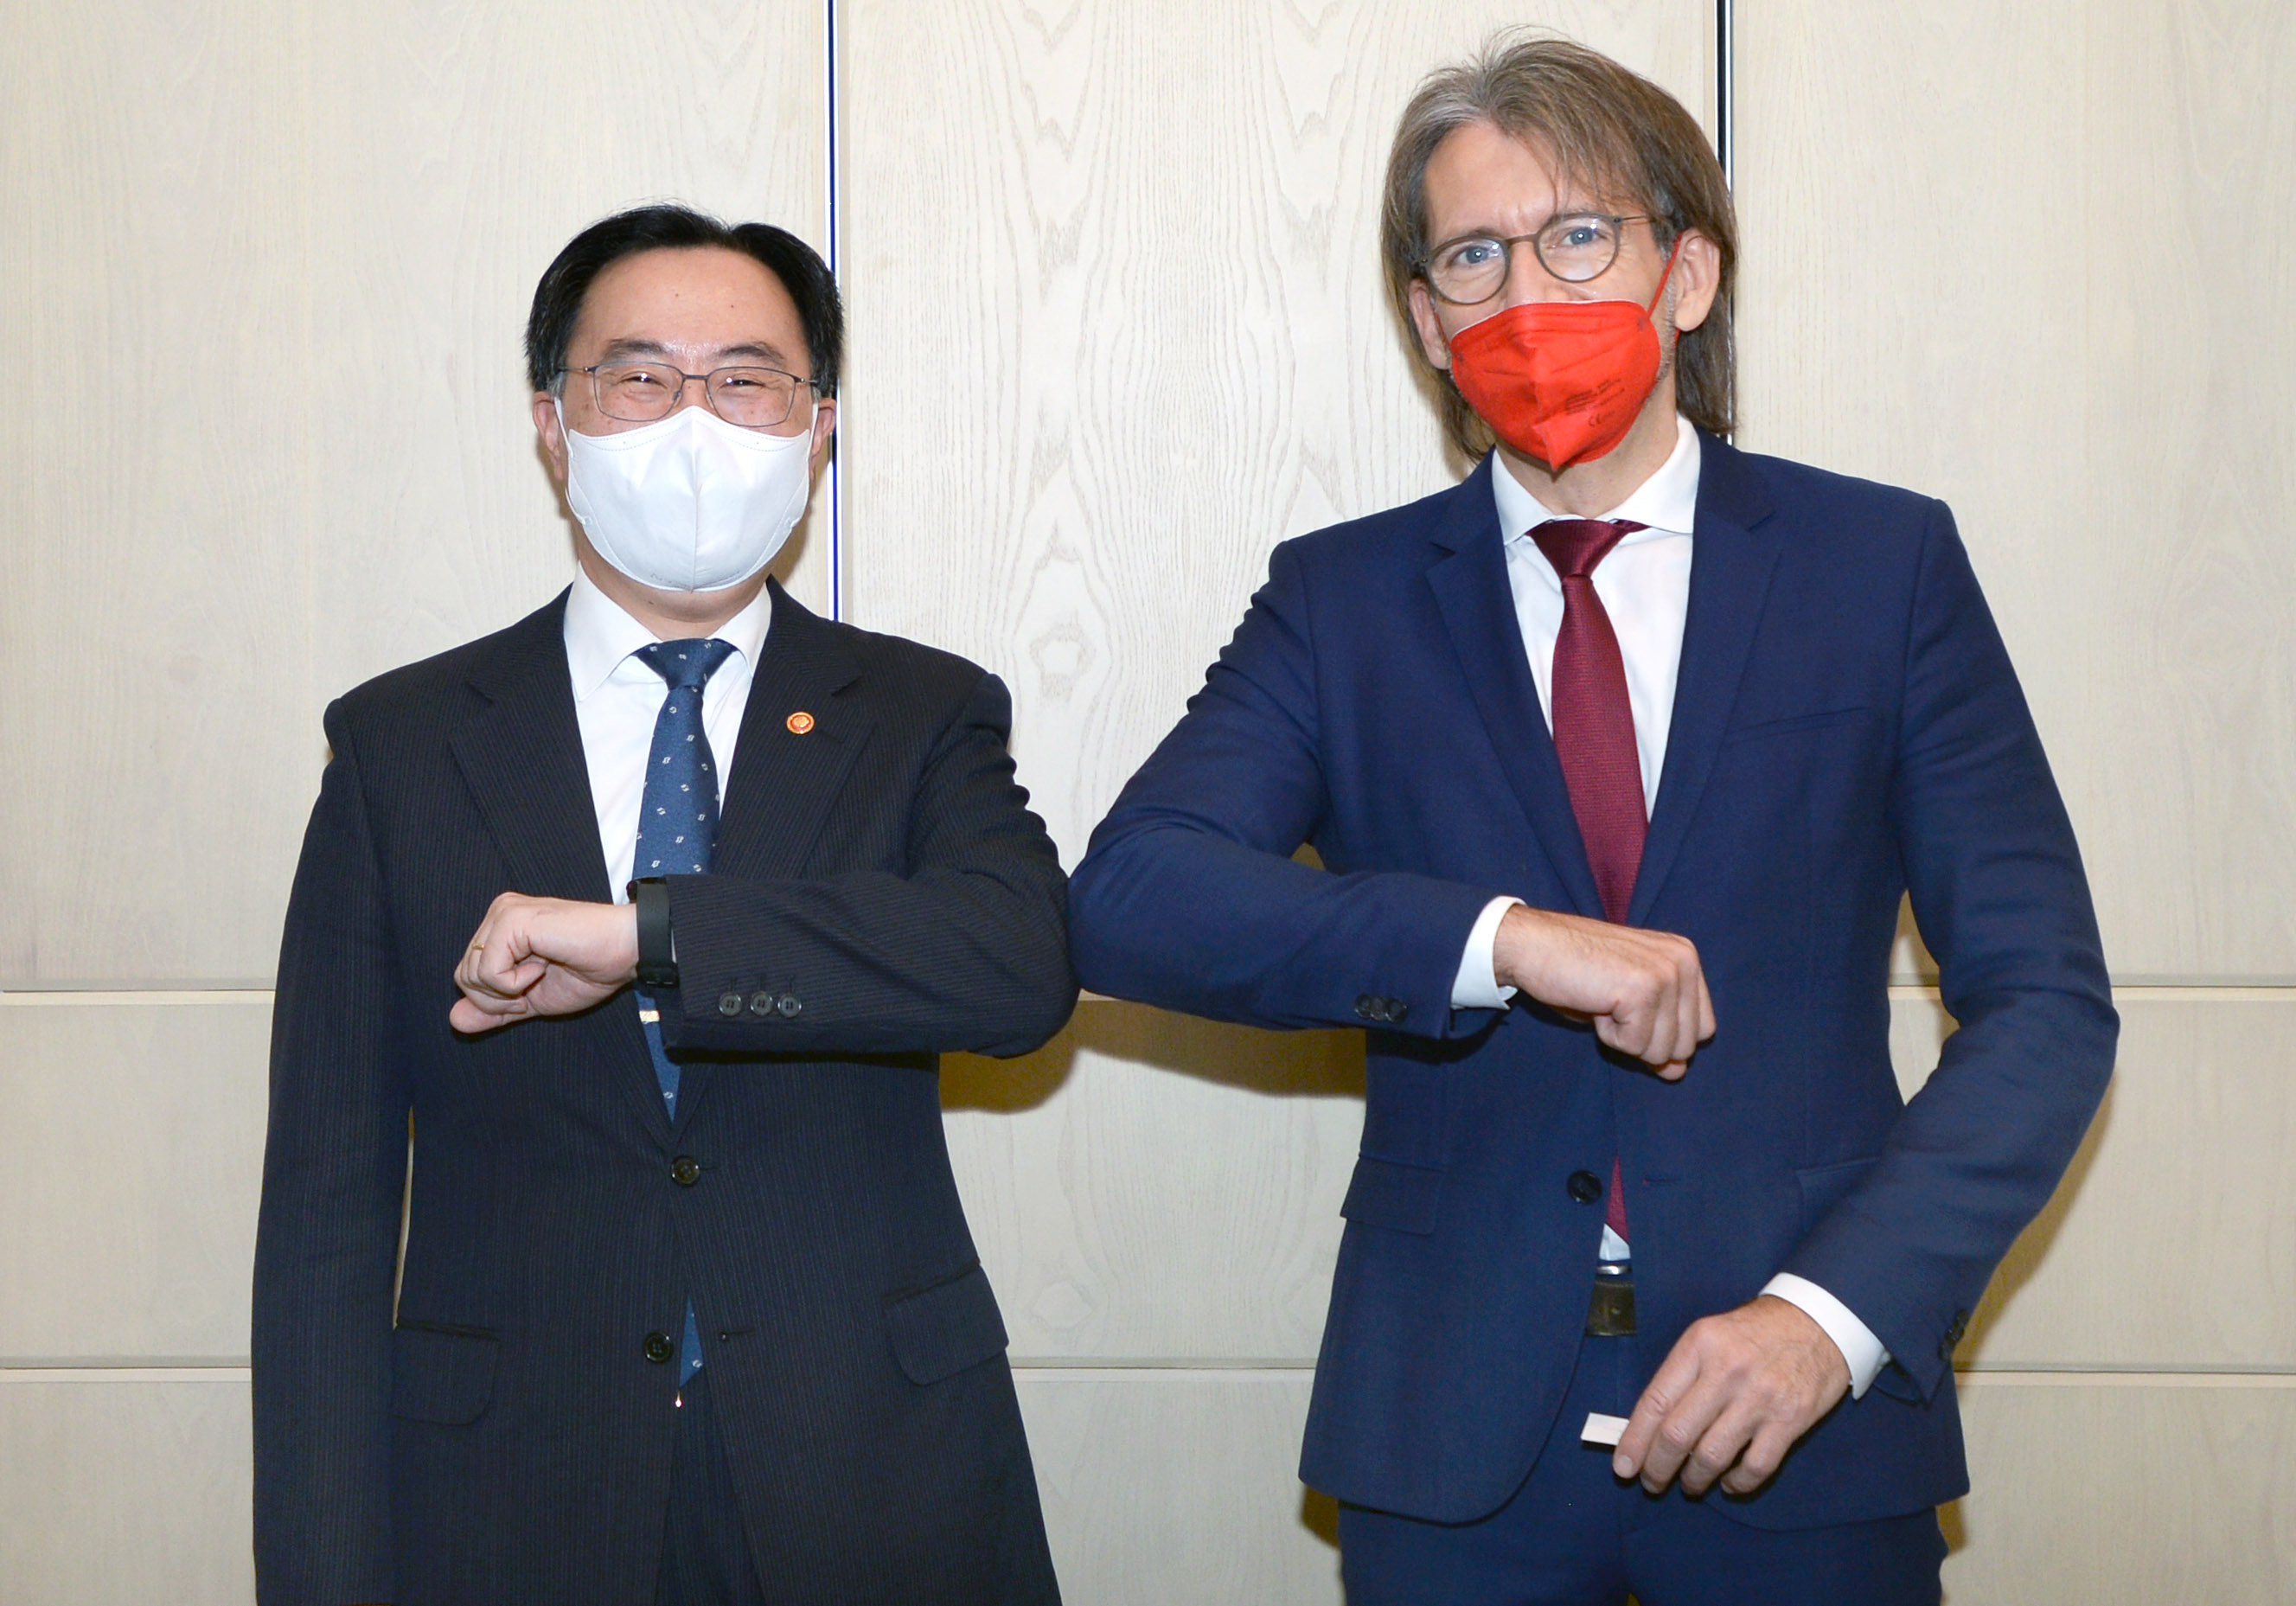 Minister Moon meets Sartorius CEO to discuss investment in biopharmaceutical raw materials Image 0